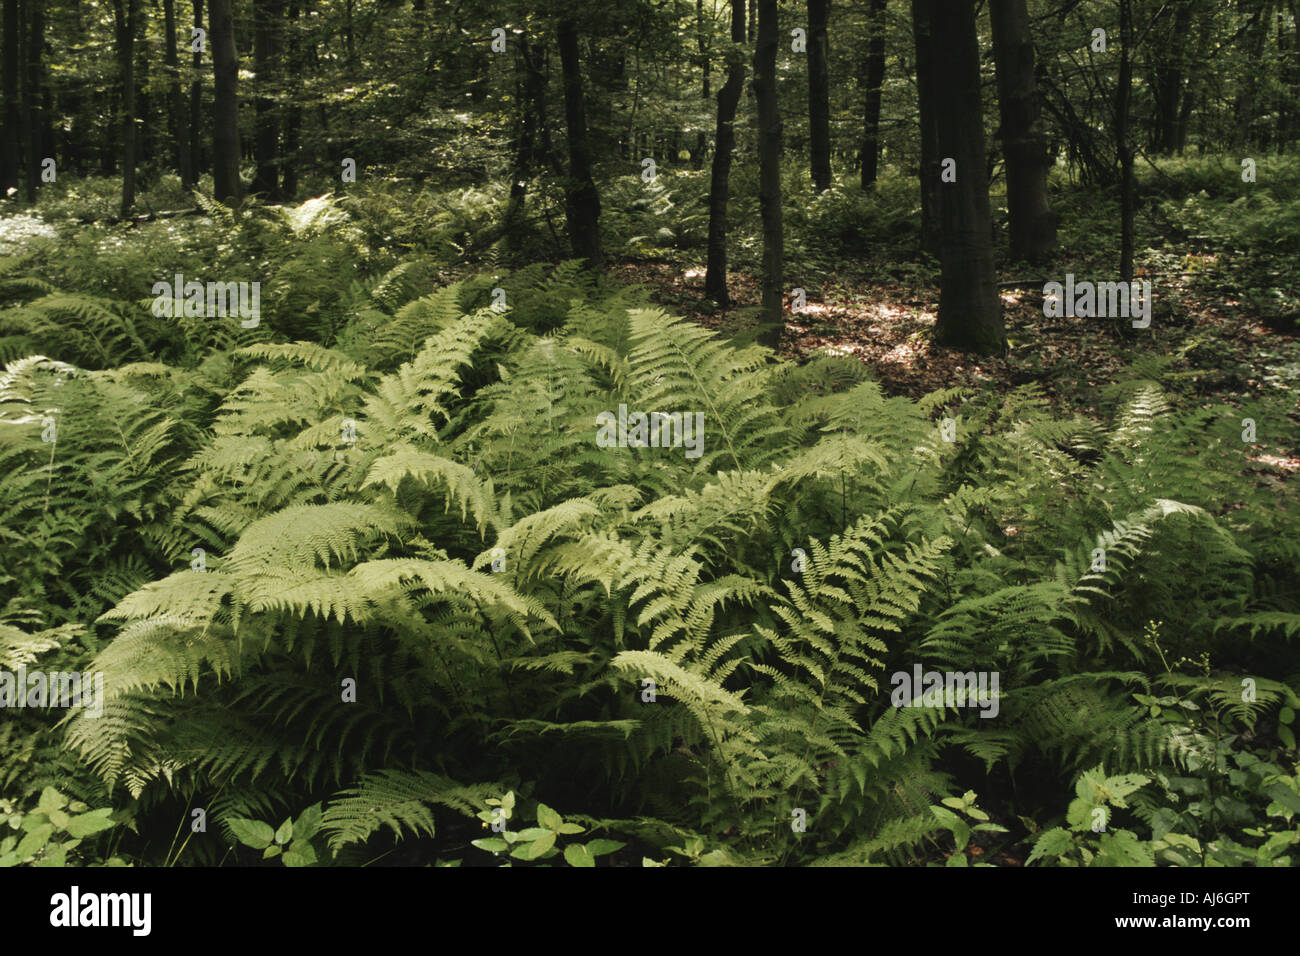 male-fern (Dryopteris filix-mas), in a forest, Germany Stock Photo